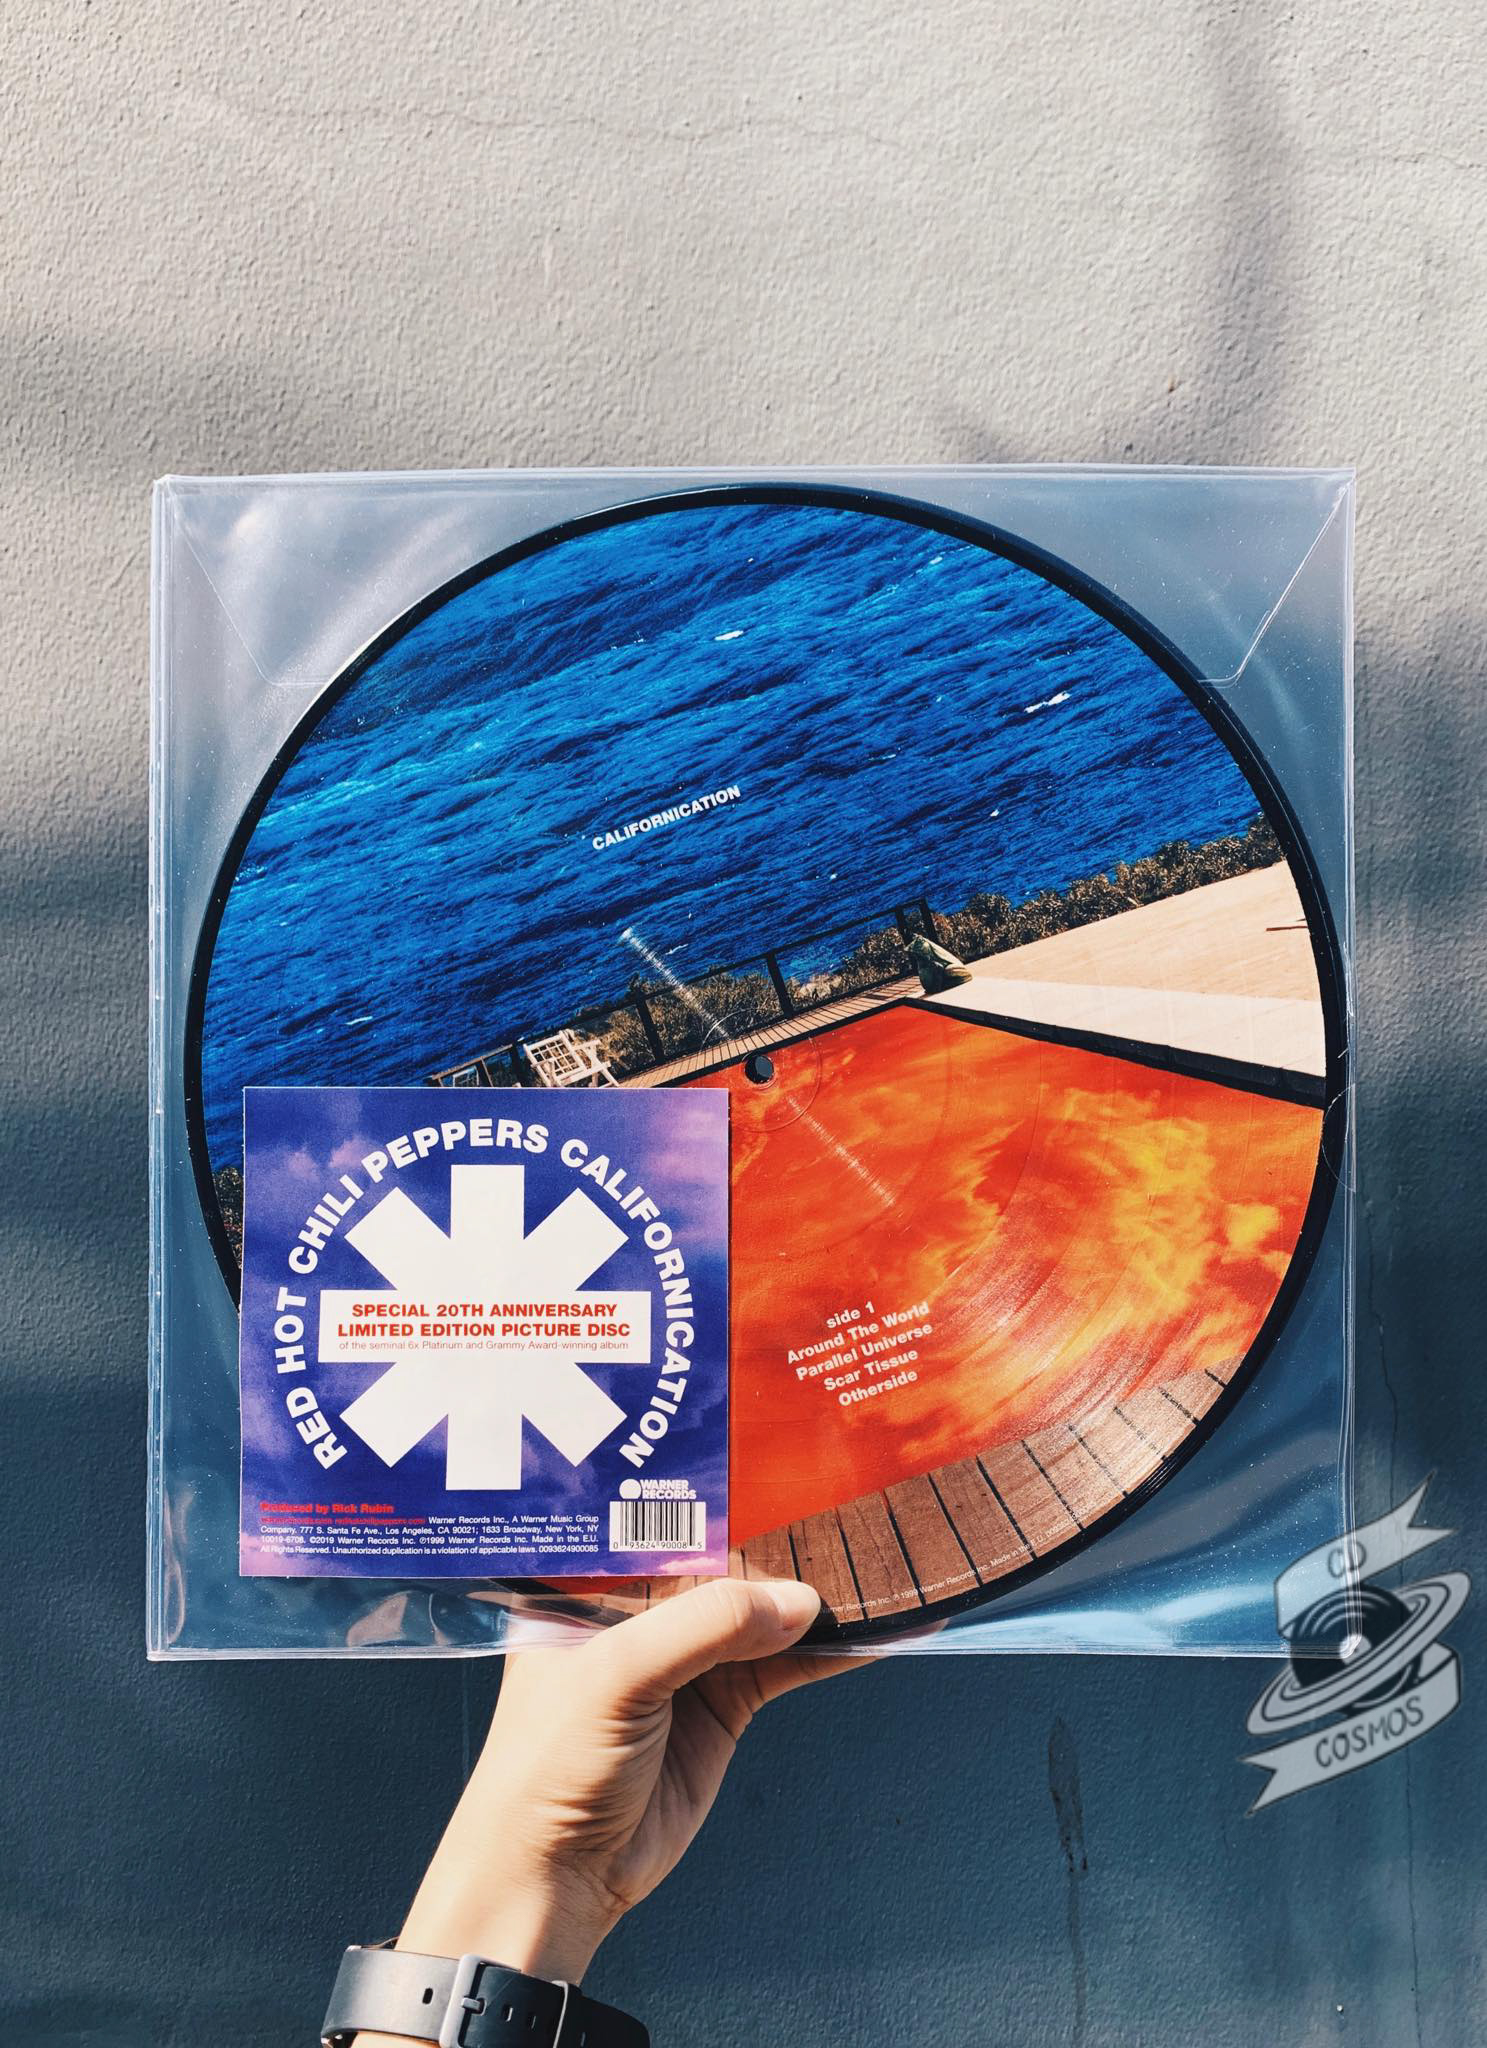 Red Hot Chili Peppers - Californication - Vinyl Picture Disc(explicit) 